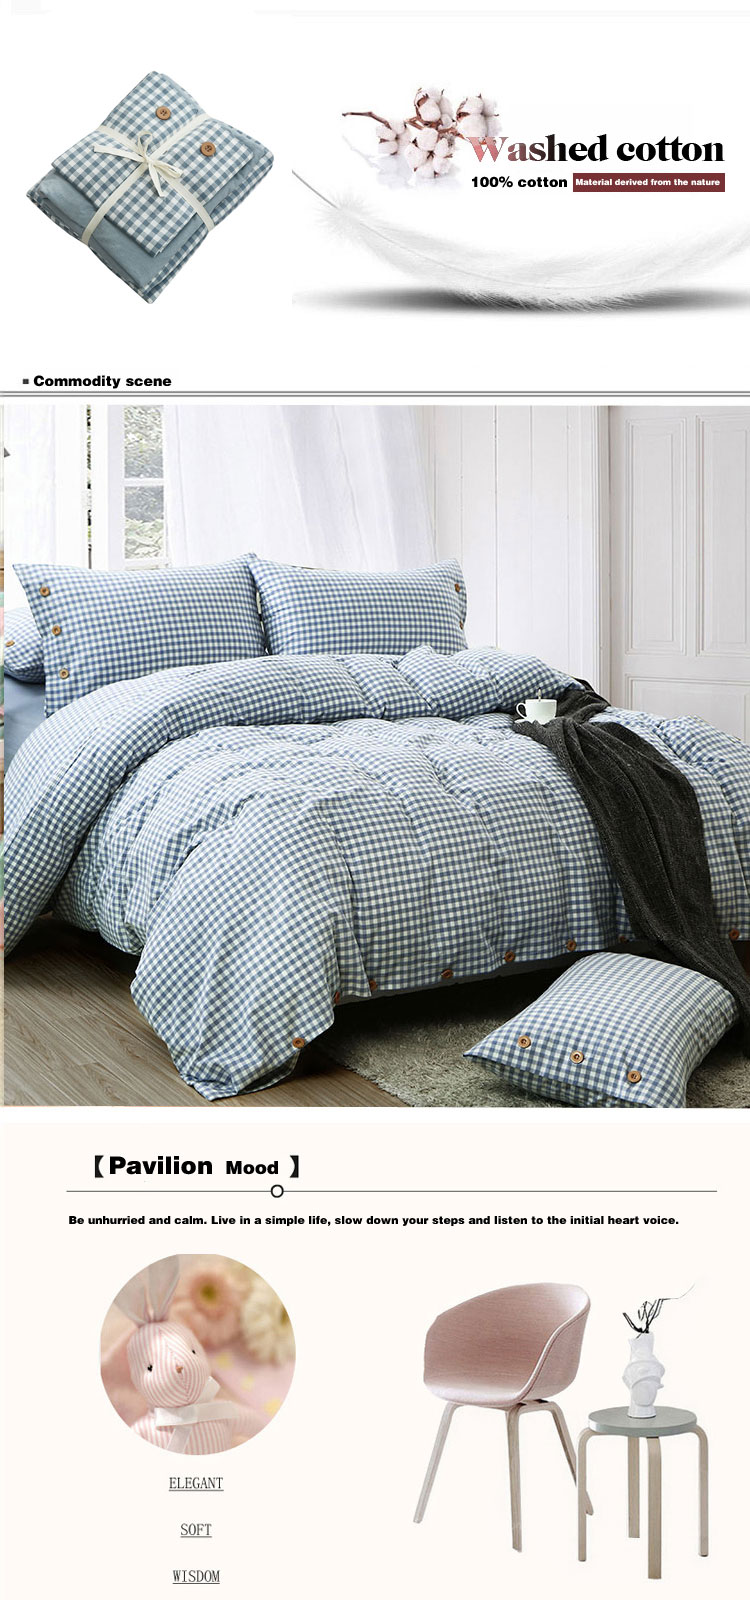 Patchwork Lodge Linen Bed Sheets